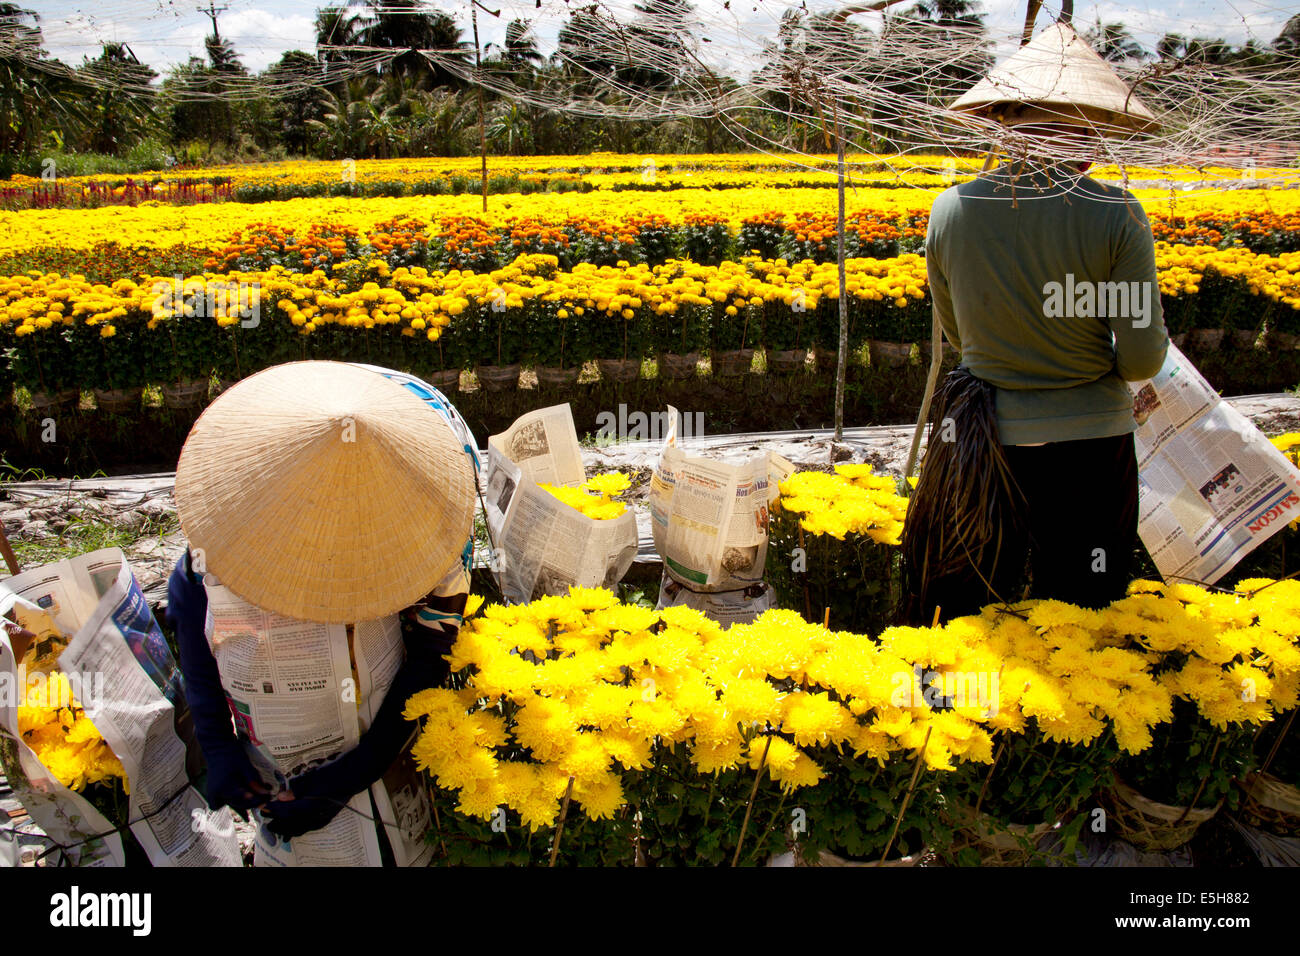 Workers prepare pots of yellow flowers to ship to market. The flowers are popular in Vietnam during Tet, the Lunar New Year. Stock Photo